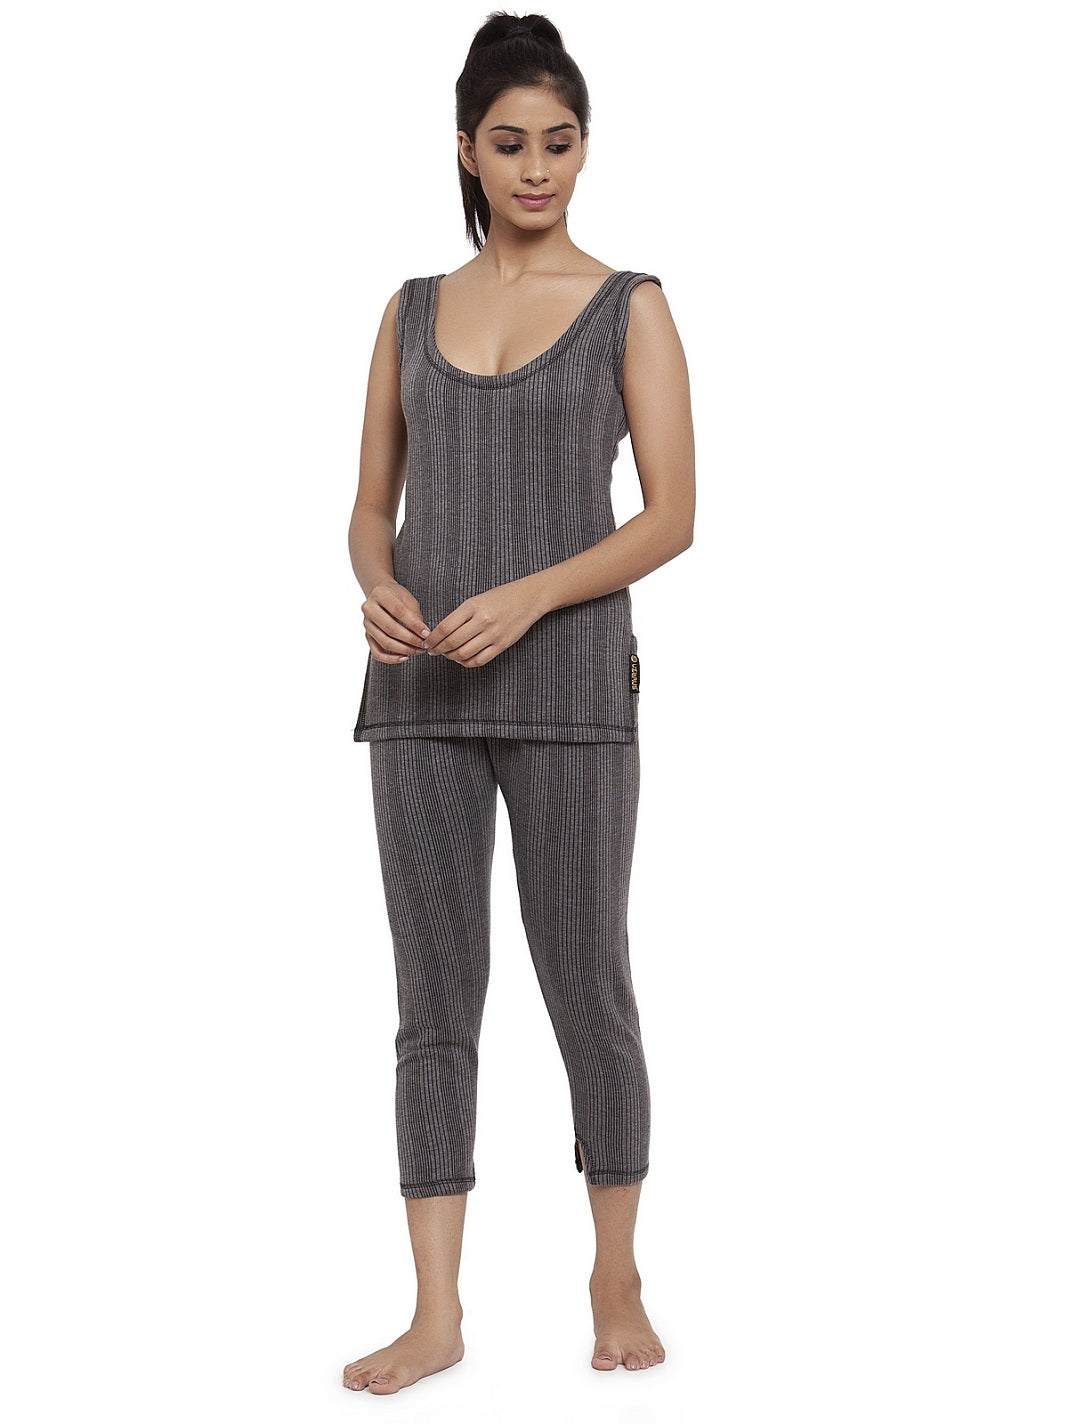 Women's Sleeveless Thermal Top And Lower Set